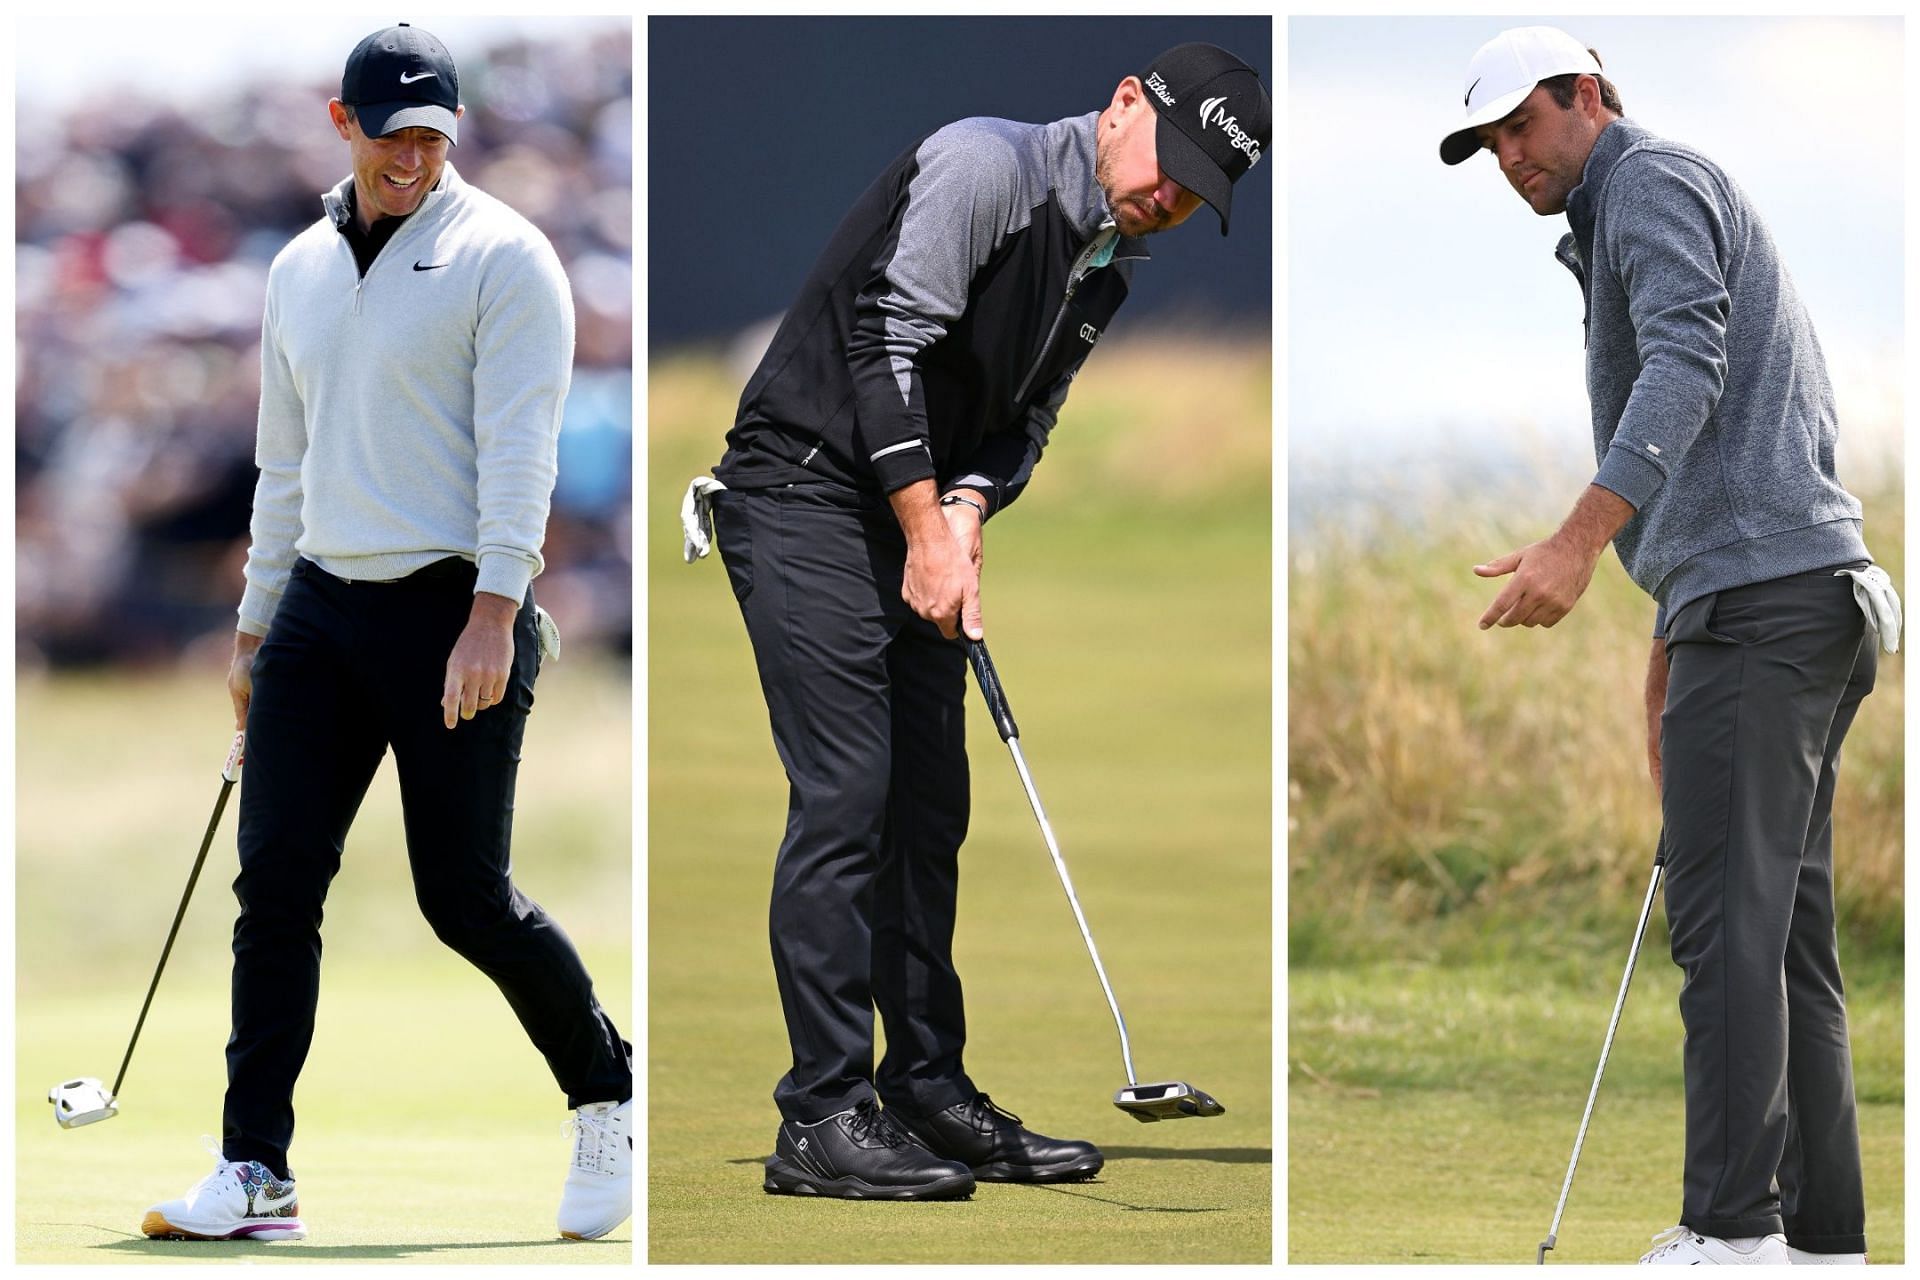 Rory McIlroy, Brian Harman and Scottie Scheffler during the second day of the 151st Open